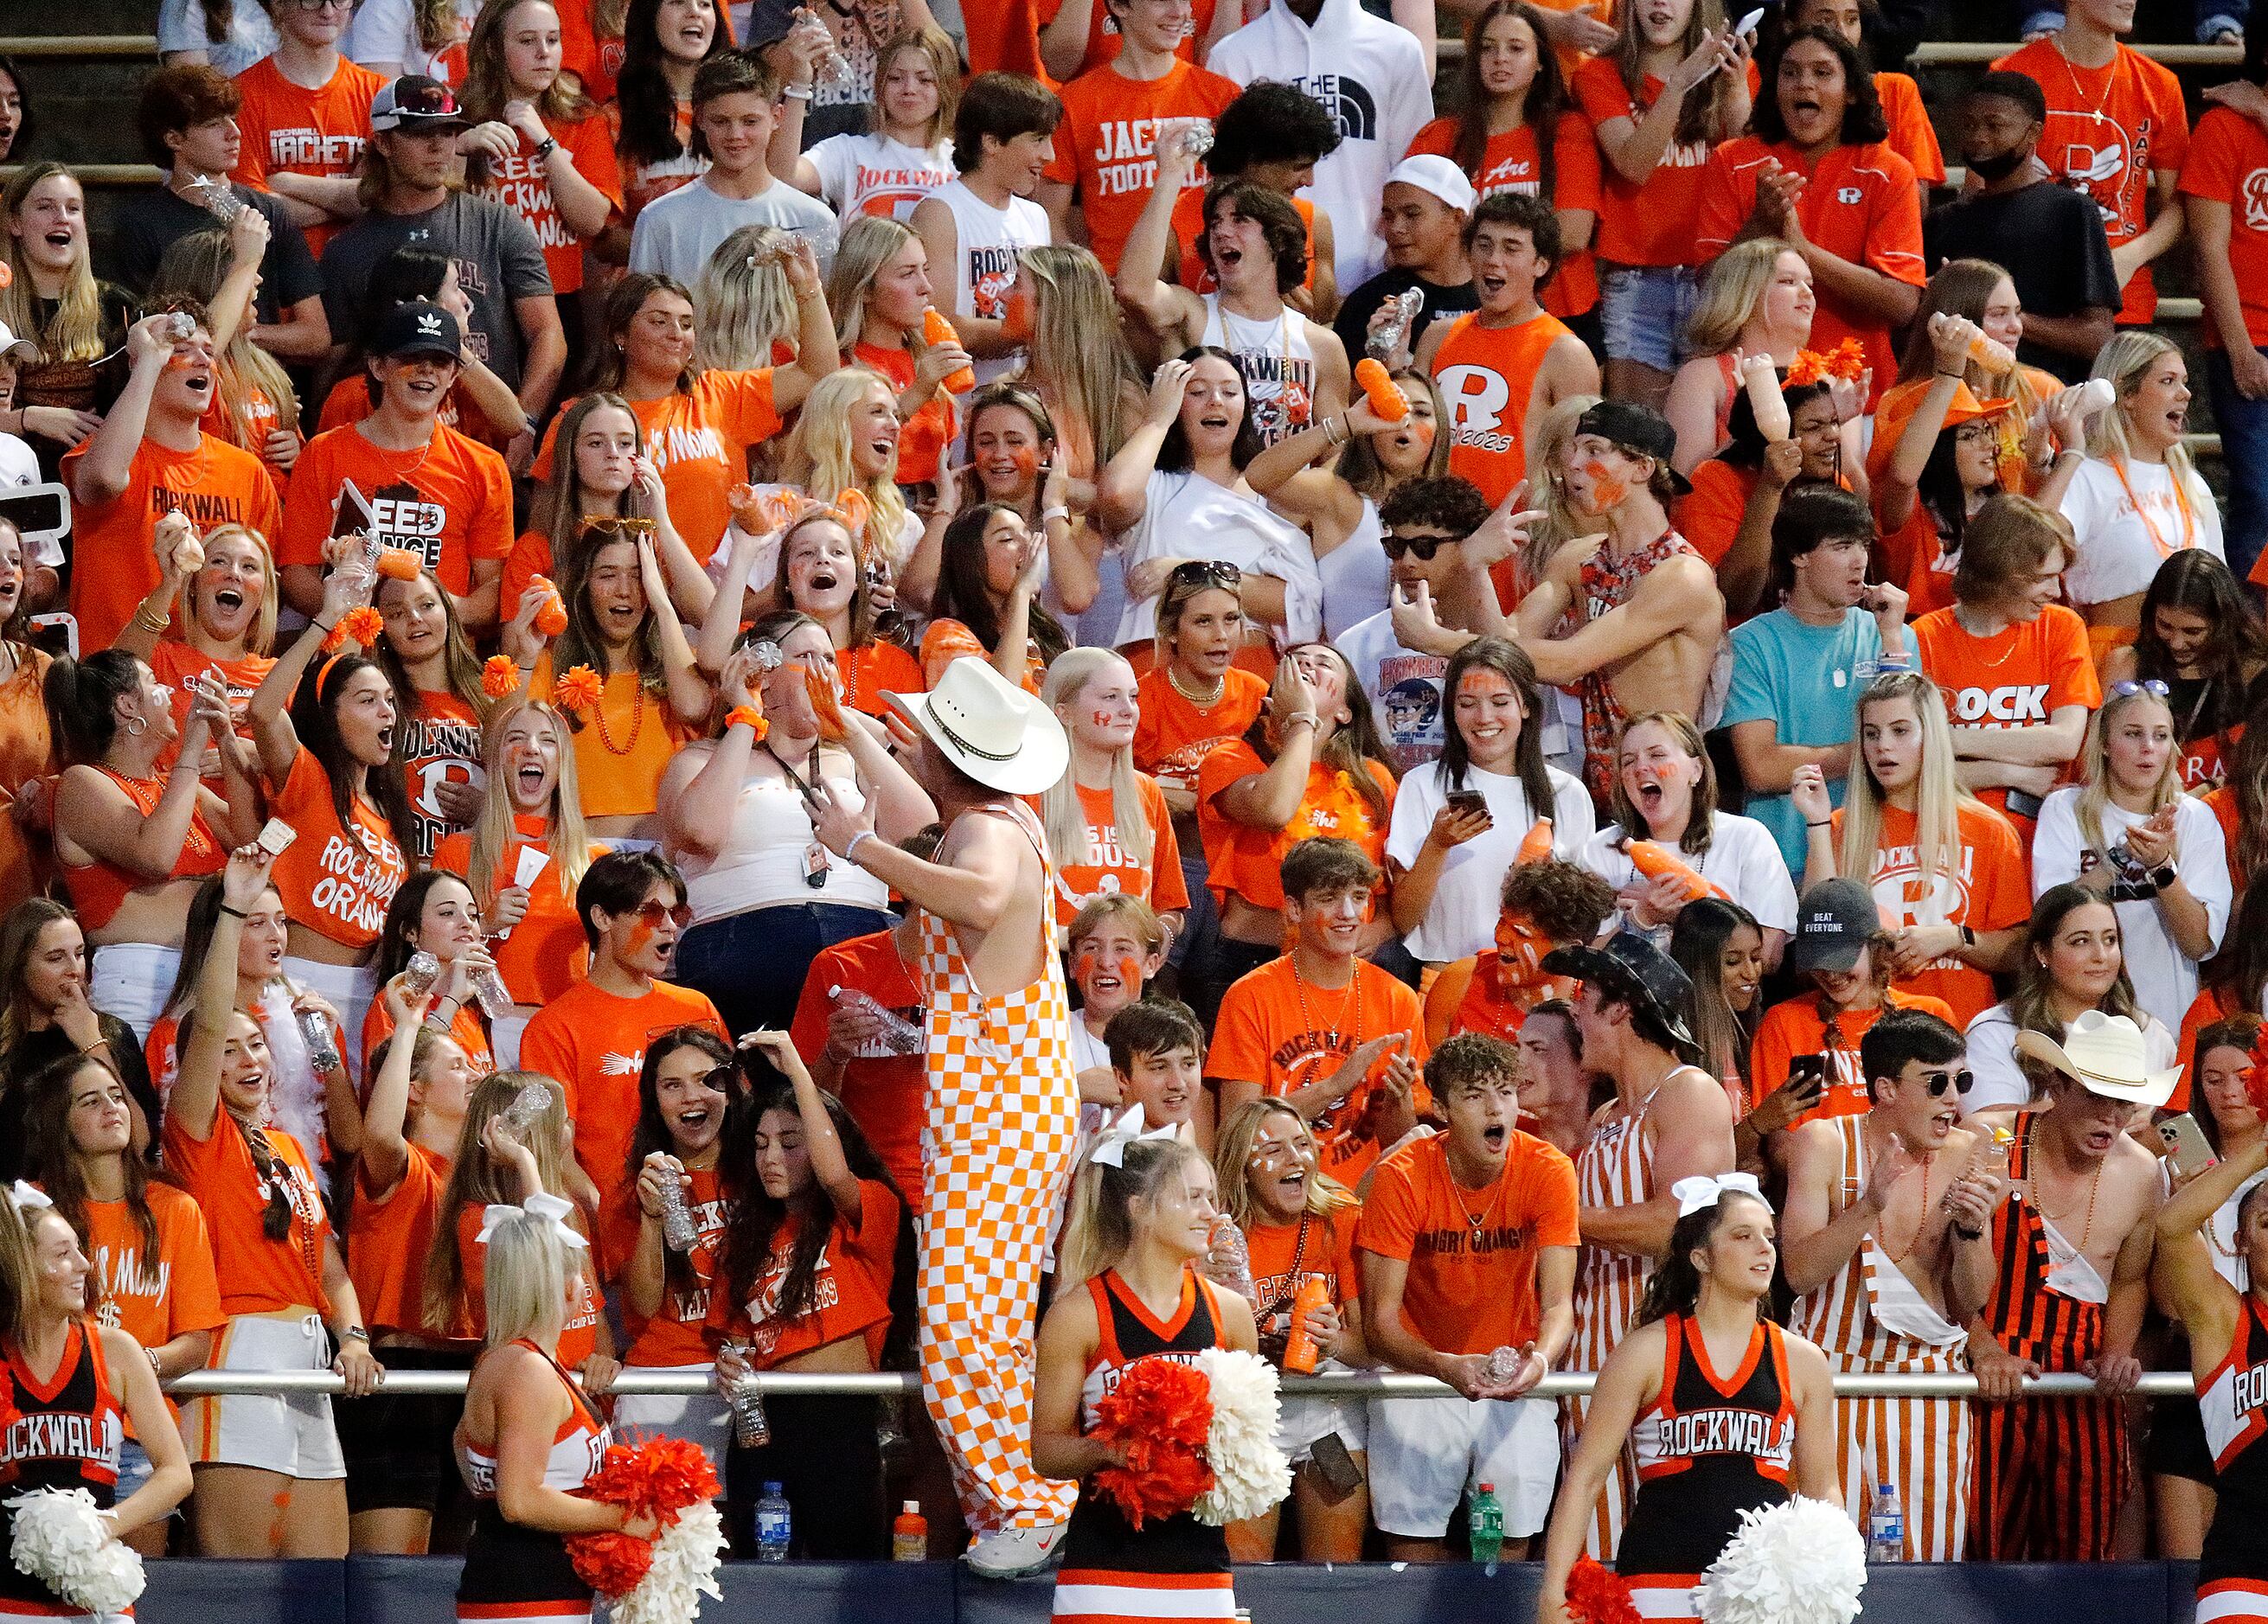 The Rockwall High School student section celebrates a touchdown during the first half as...